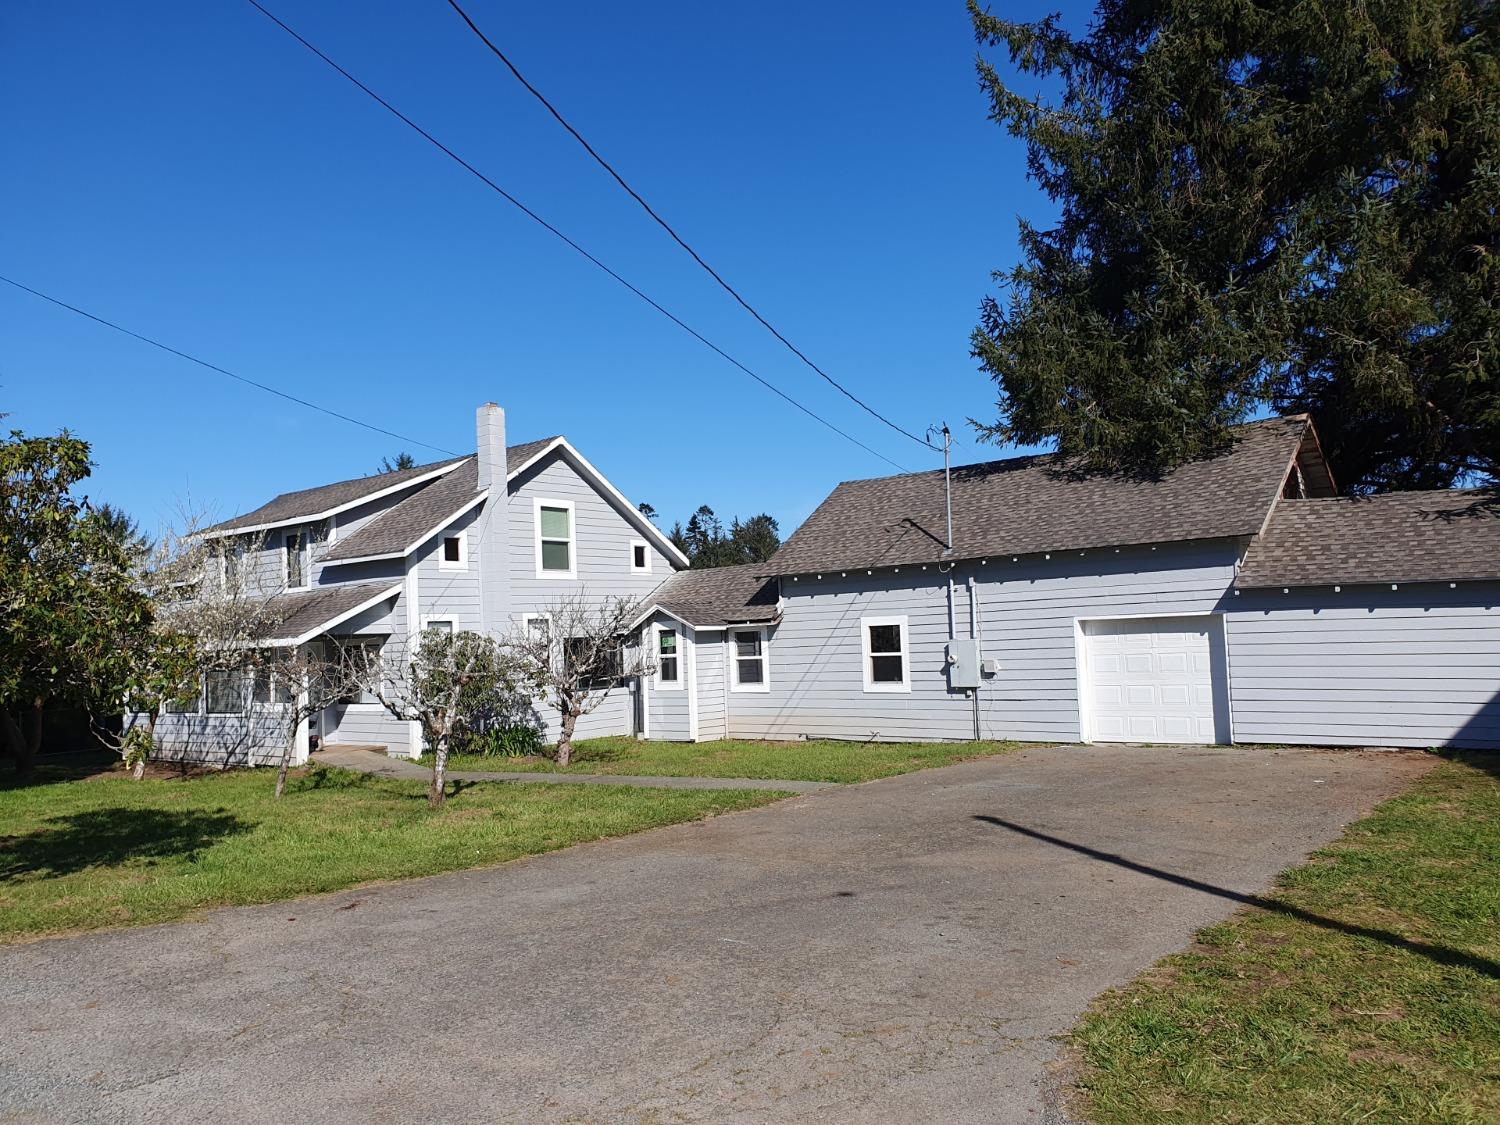 Photo of 1300 Morehead Rd in Crescent City, CA